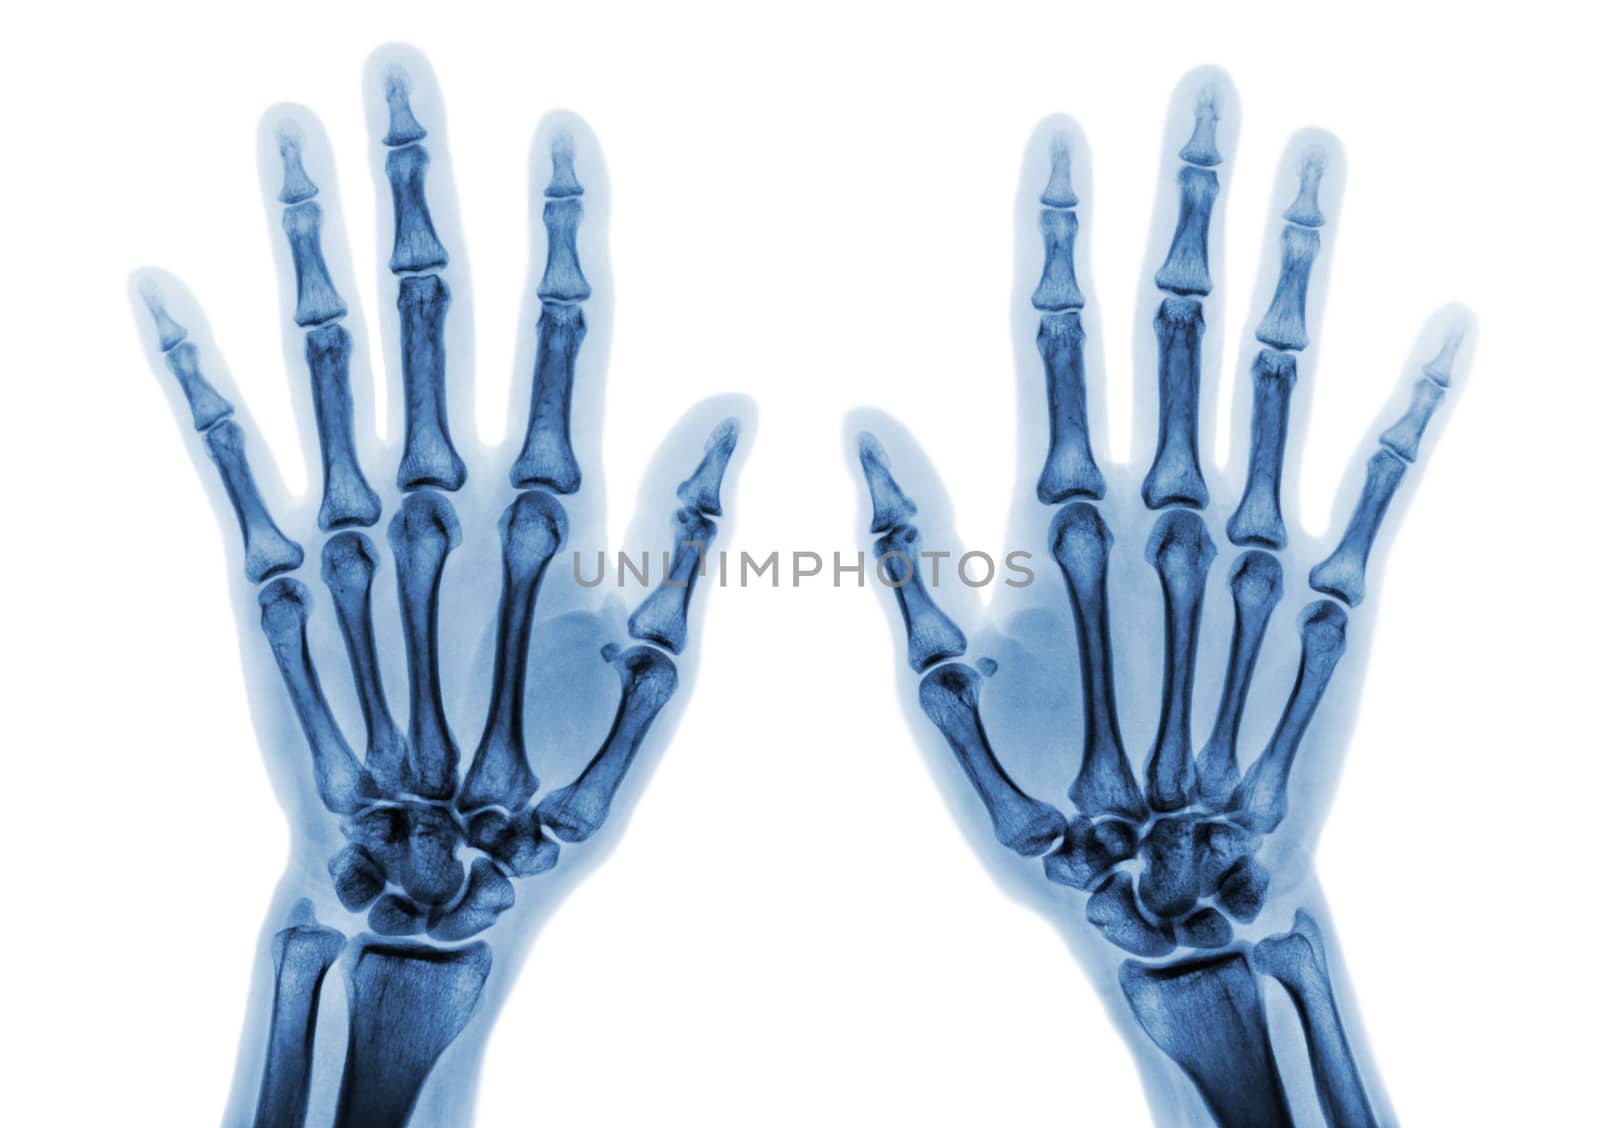 Film x-ray both hand AP show normal human hands on white background ( isolated ) by stockdevil